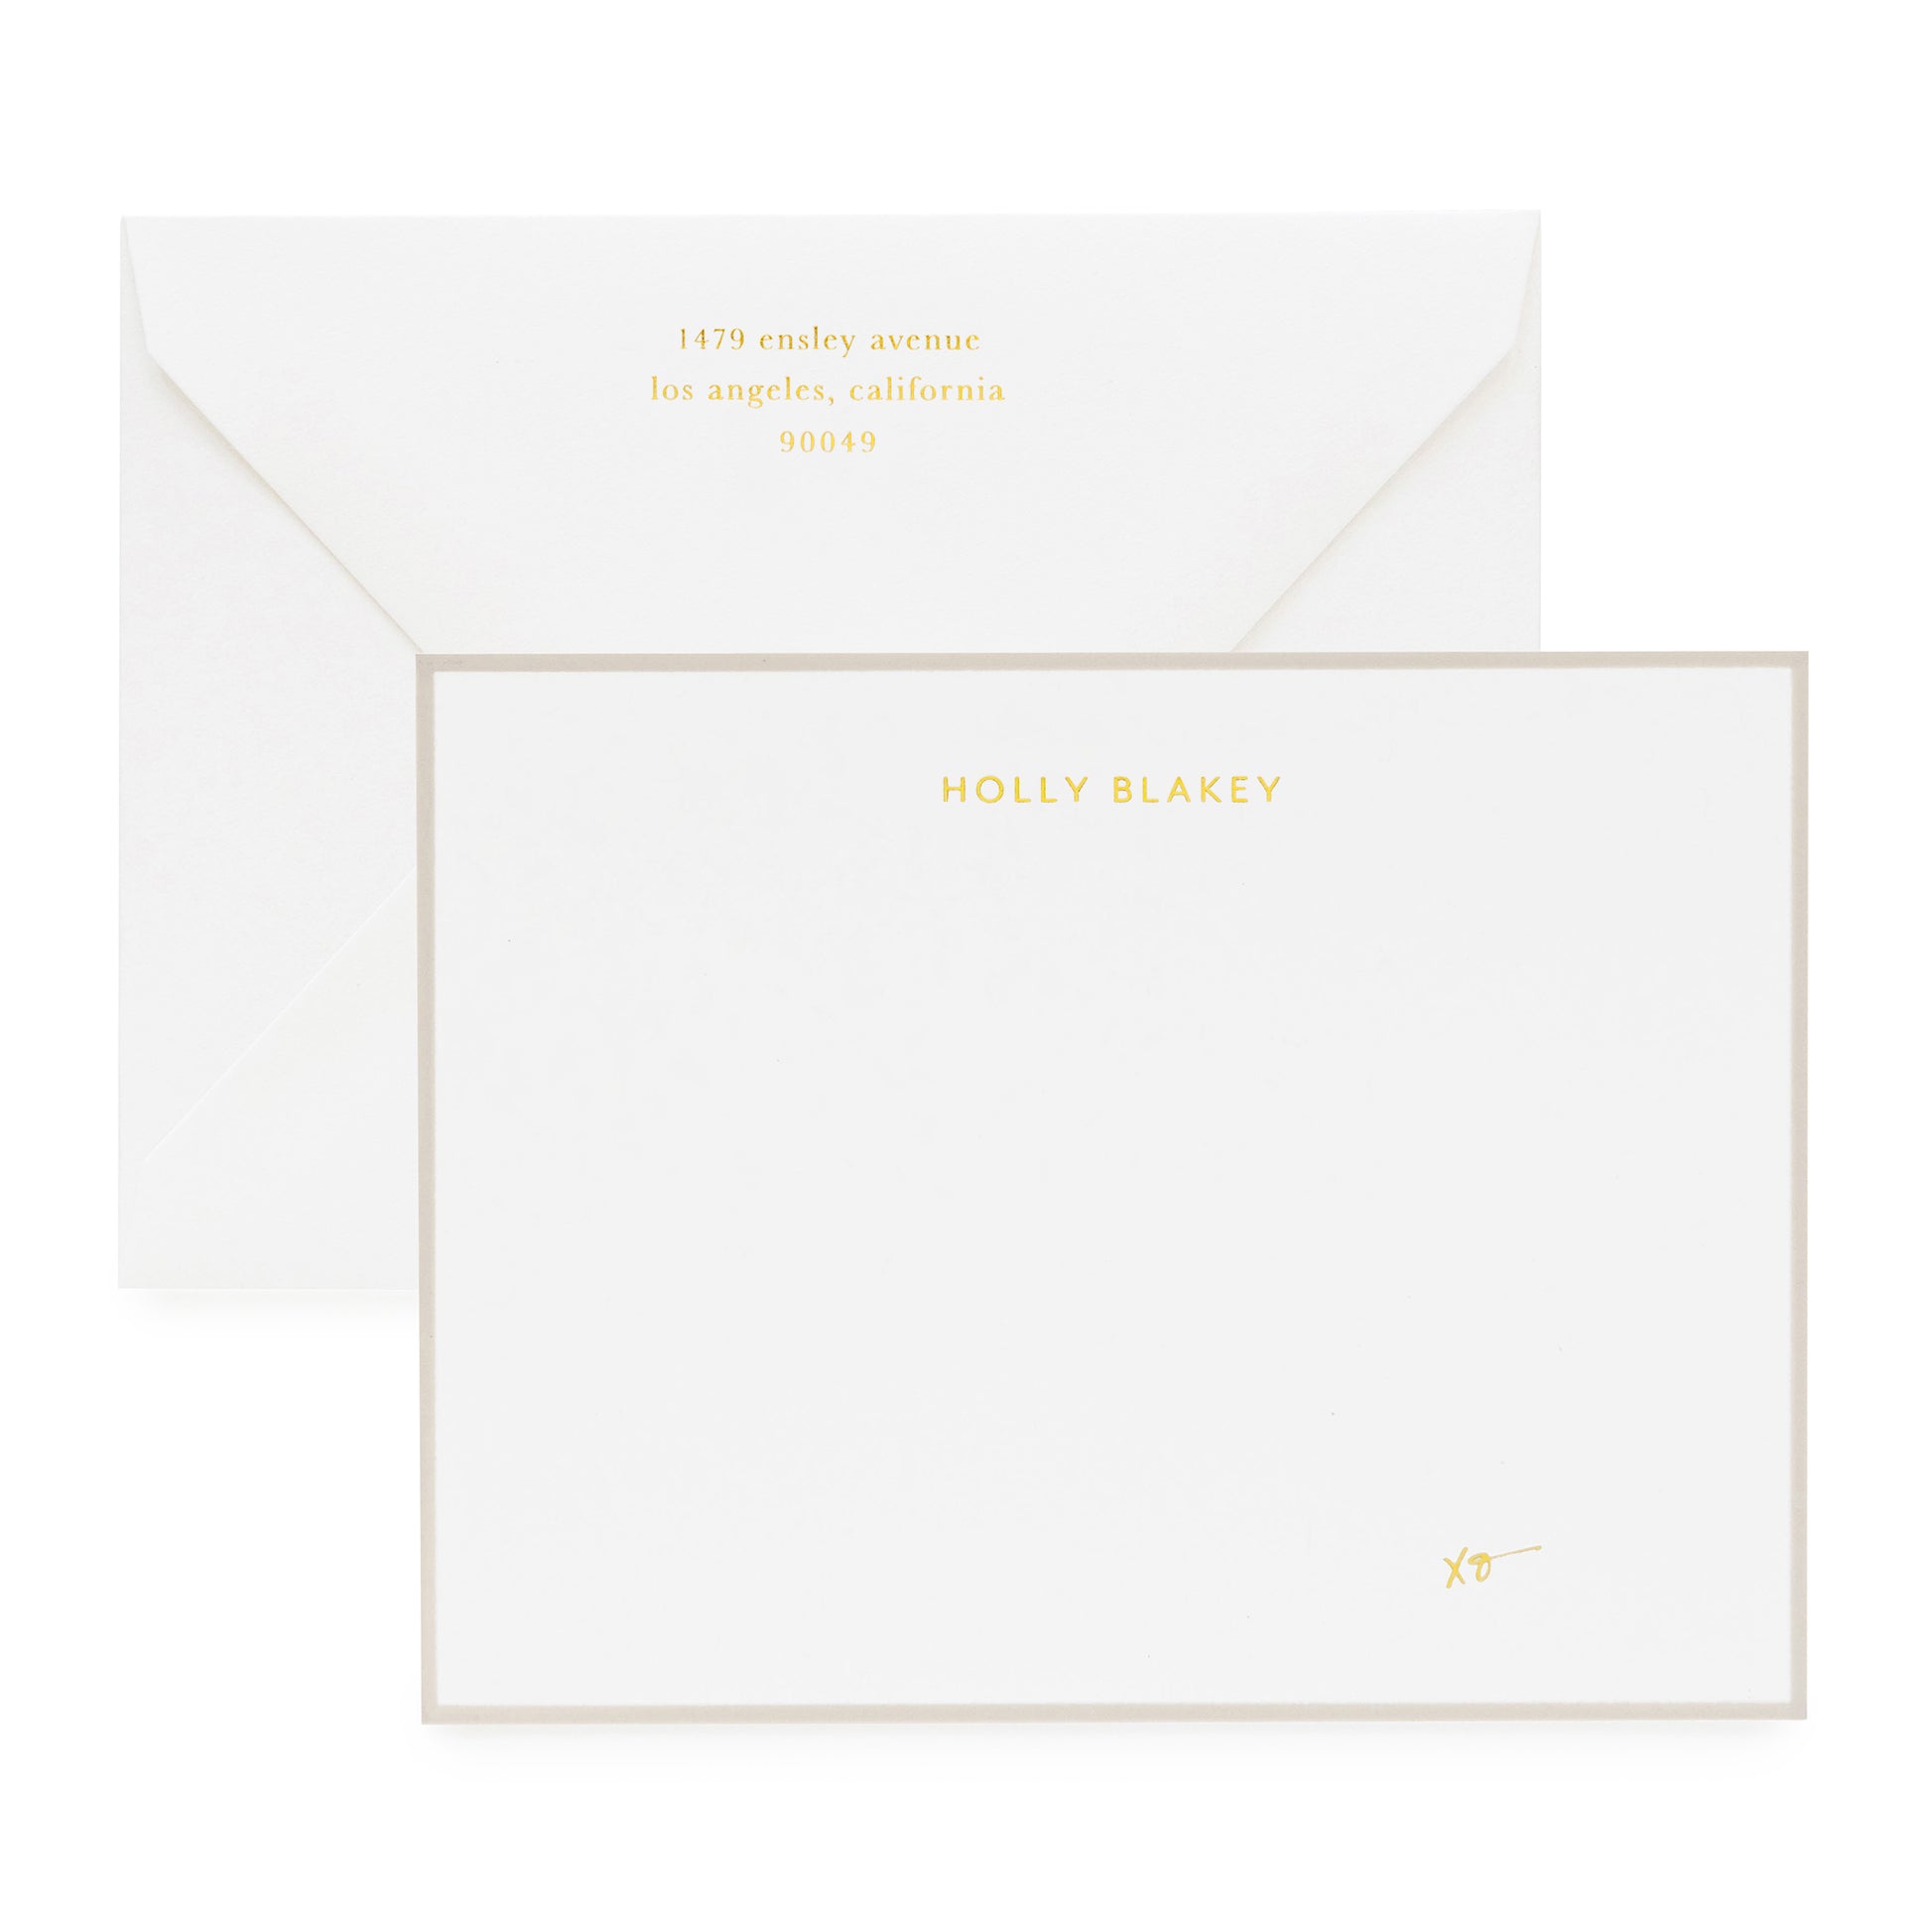 Holly custom stationery with grey and gold foil with xo on stationery and gold foil return address